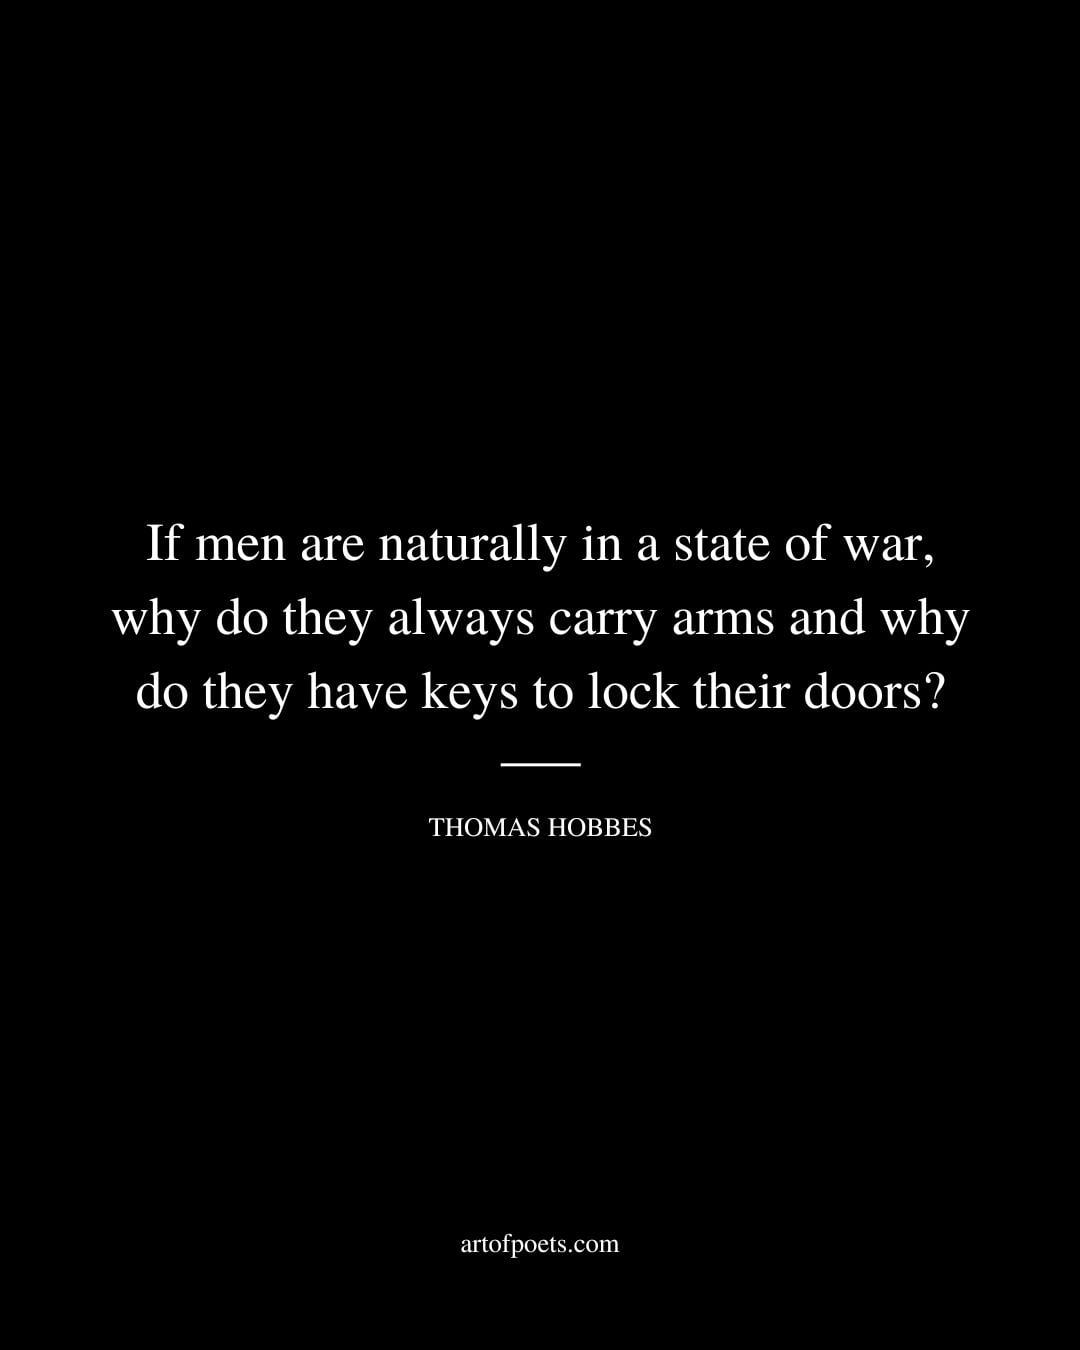 If men are naturally in a state of war why do they always carry arms and why do they have keys to lock their doors